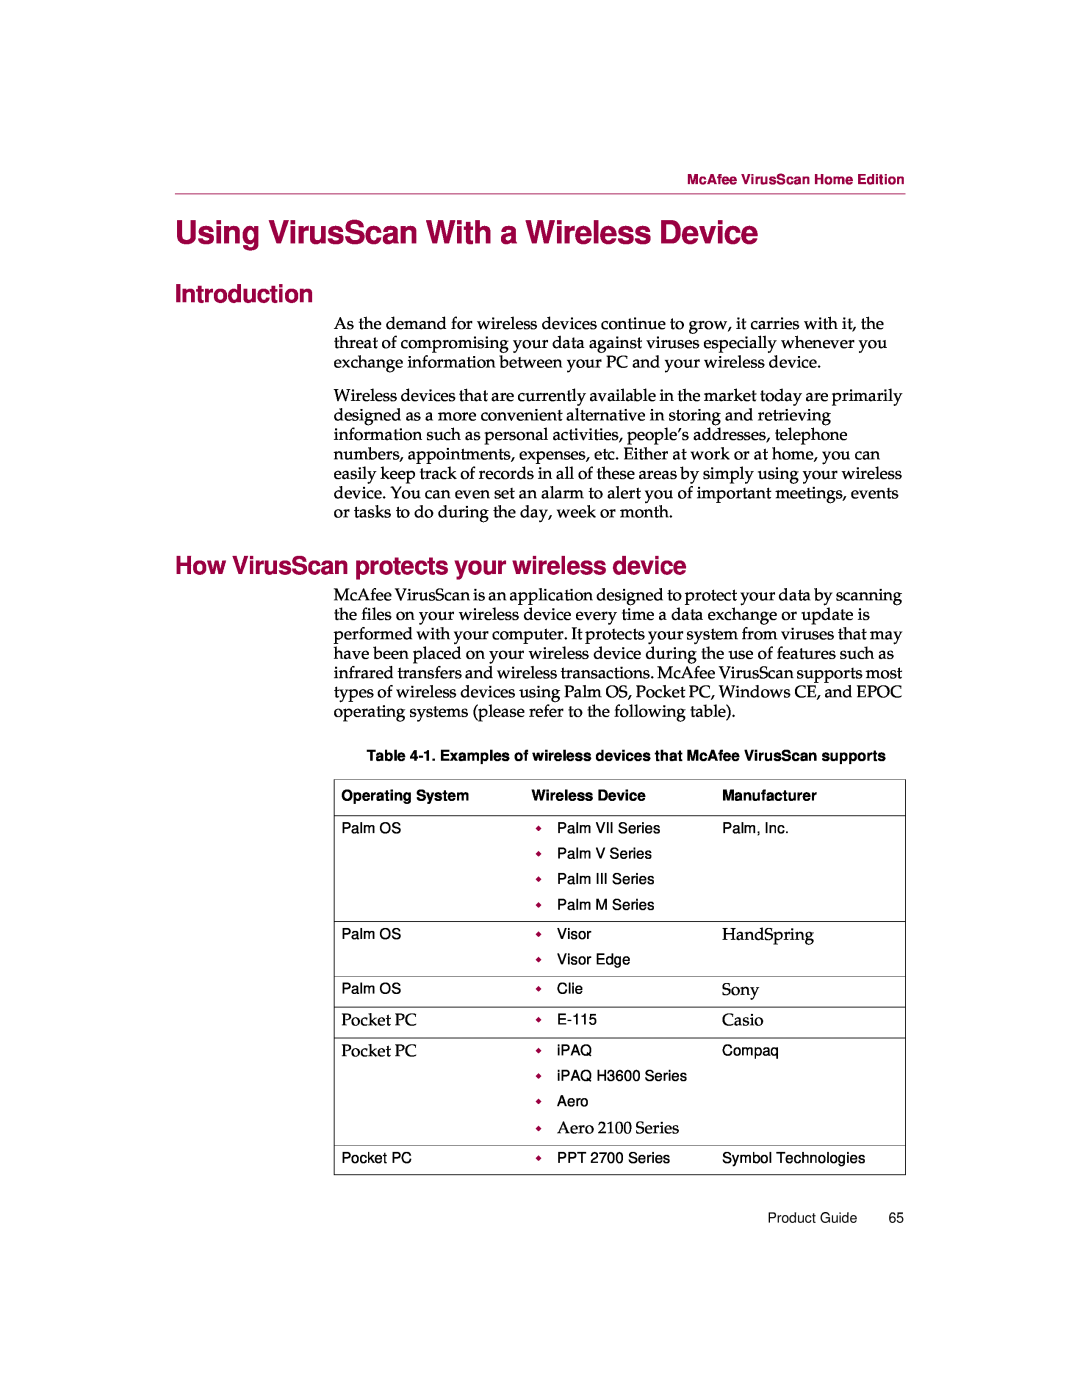 McAfee 5 manual Using VirusScan With a Wireless Device, Introduction, How VirusScan protects your wireless device 